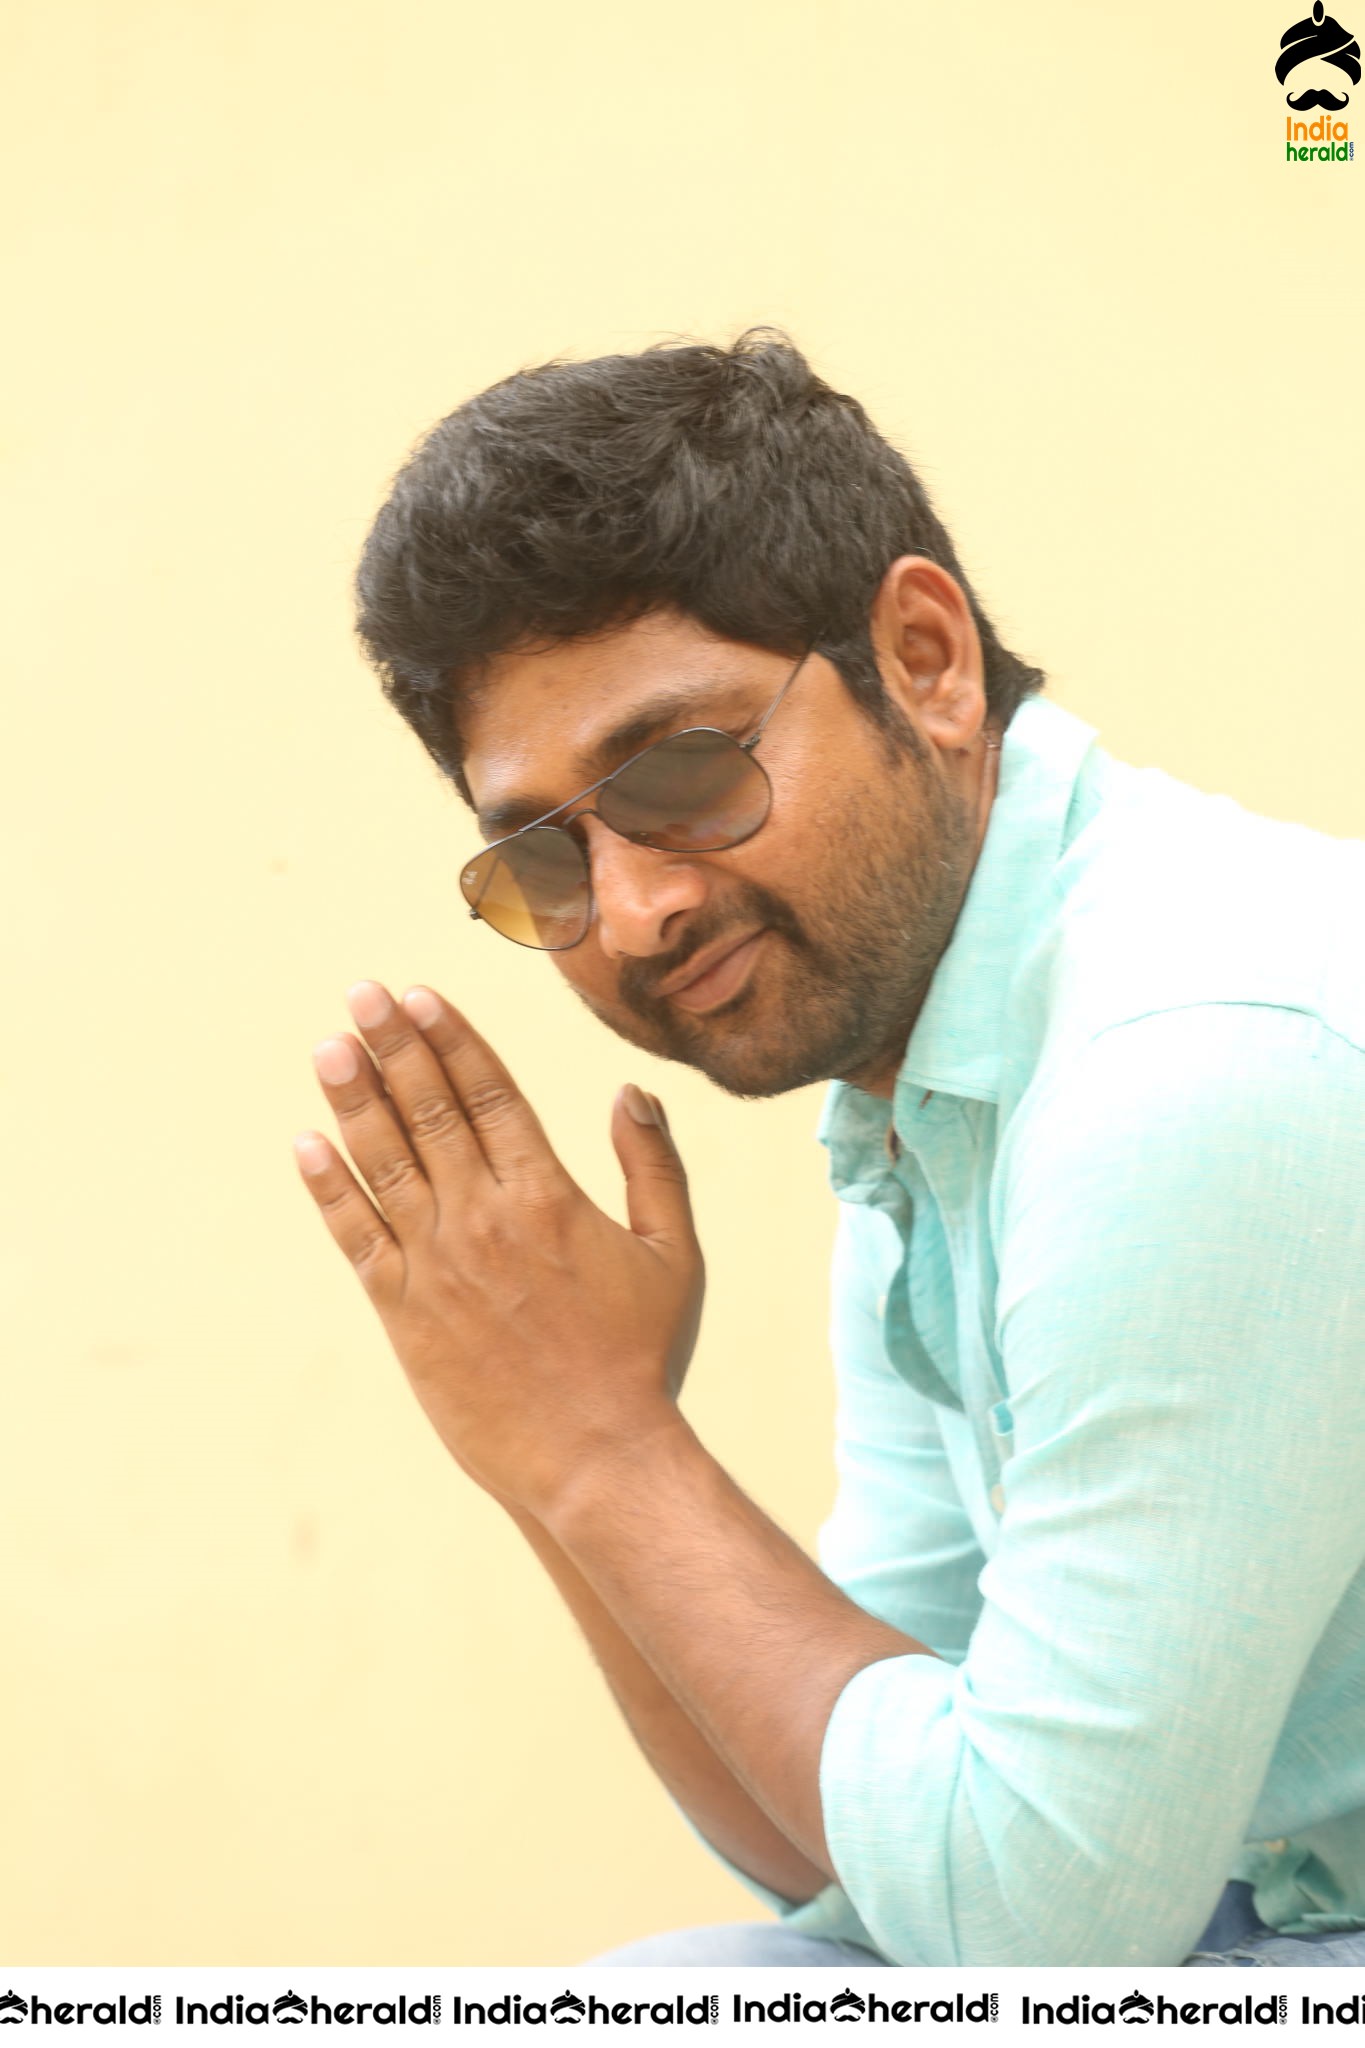 Director Thiru Looking Stylish in these Latest Photos